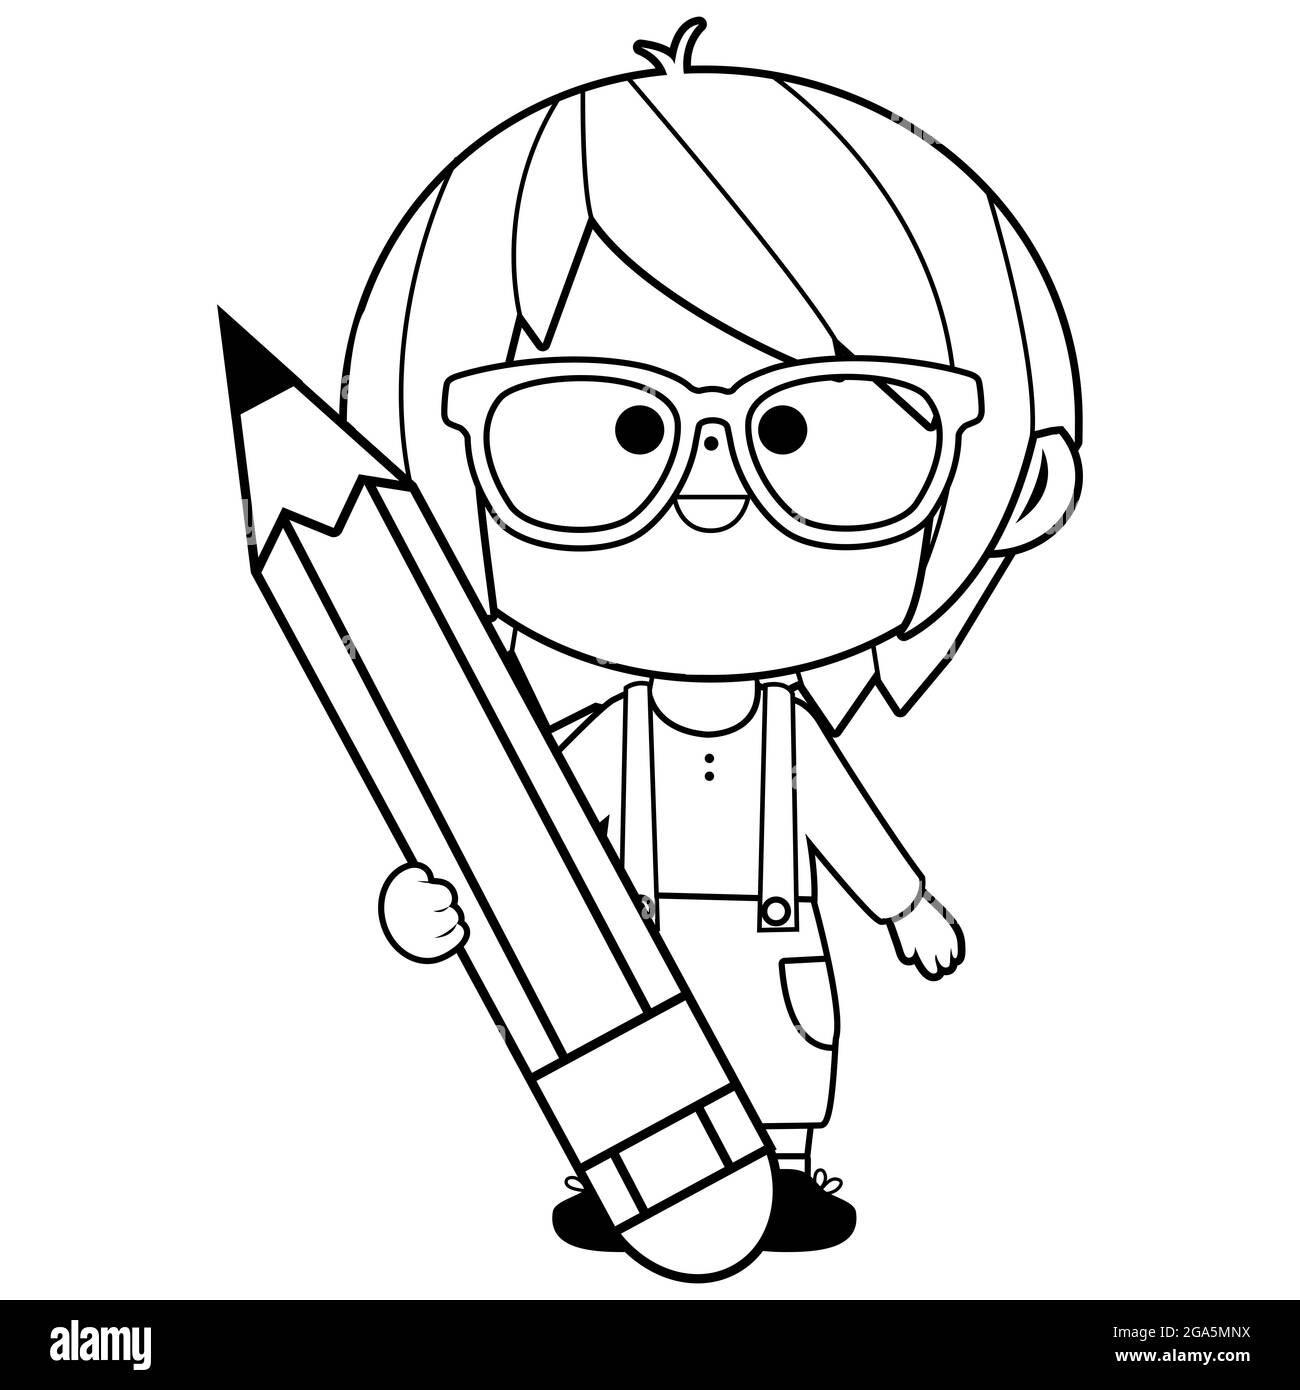 Little boy student holding a big pencil. Black and white coloring page. Stock Photo